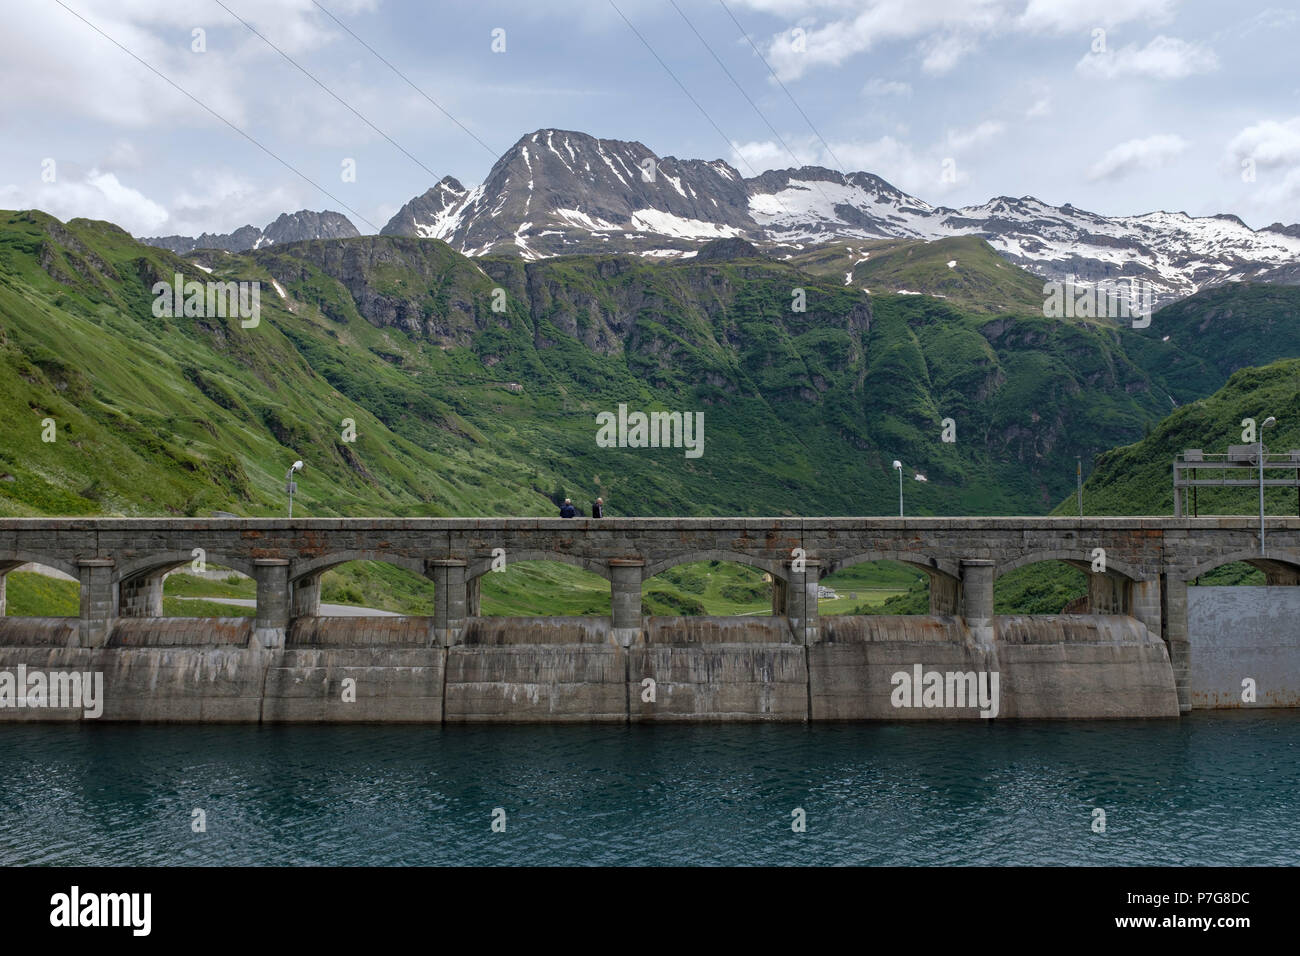 Dam on a lake of Morasco, located in Piedmonte, Italy at 1815m above the sea level. Stock Photo